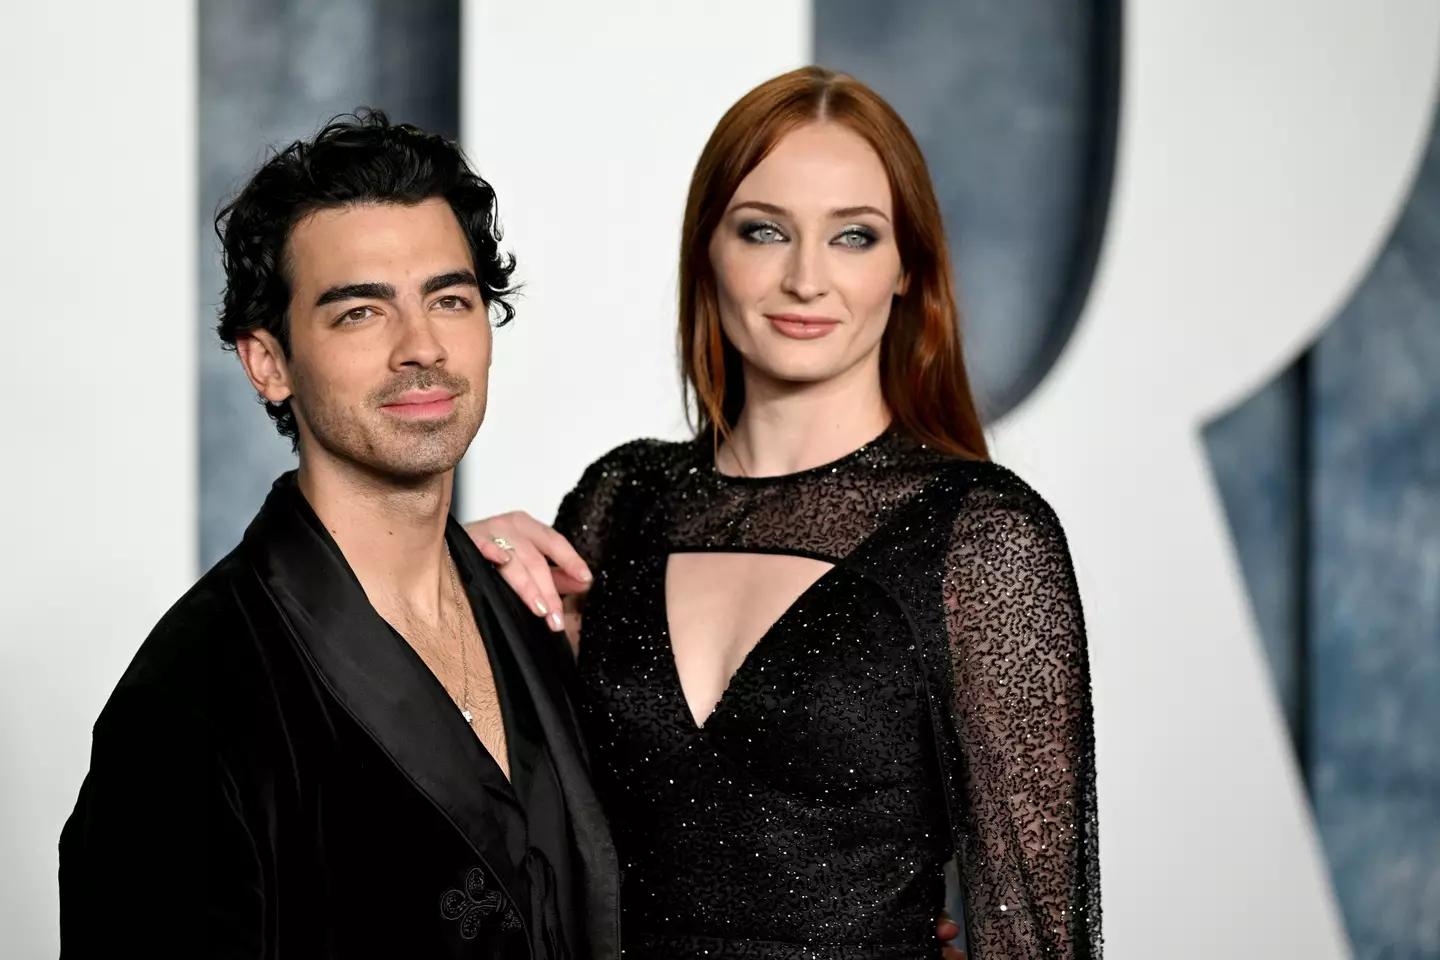 Sophie Turner and Joe Jonas have been married for 4 years.